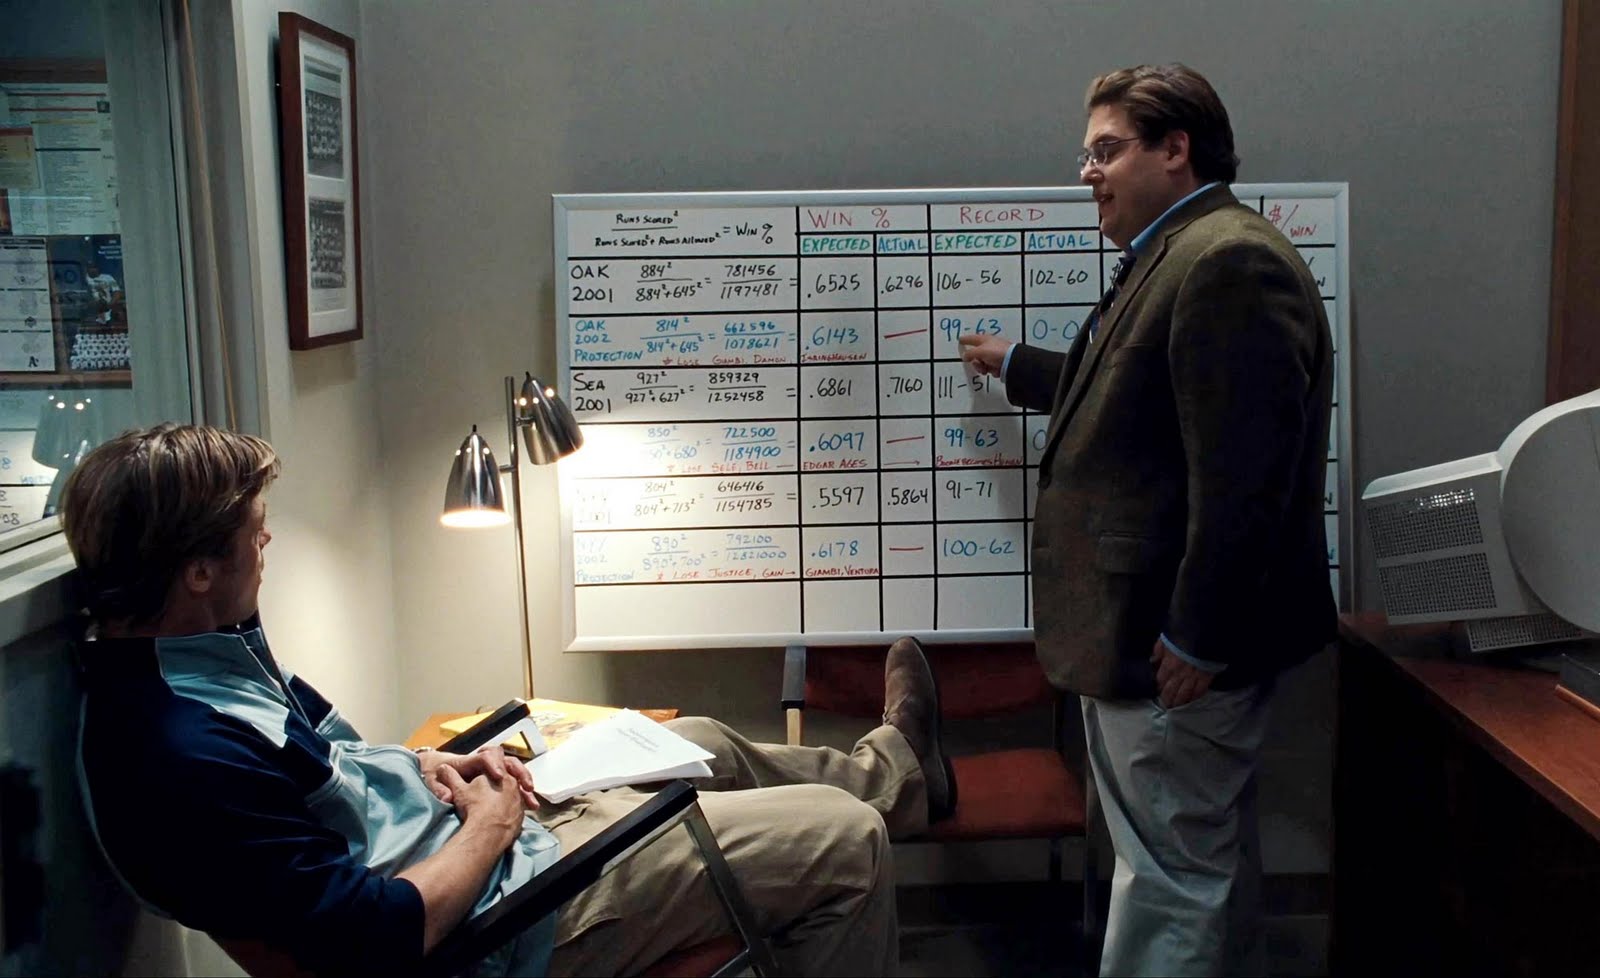 Sourcing candidates in the Moneyball approach